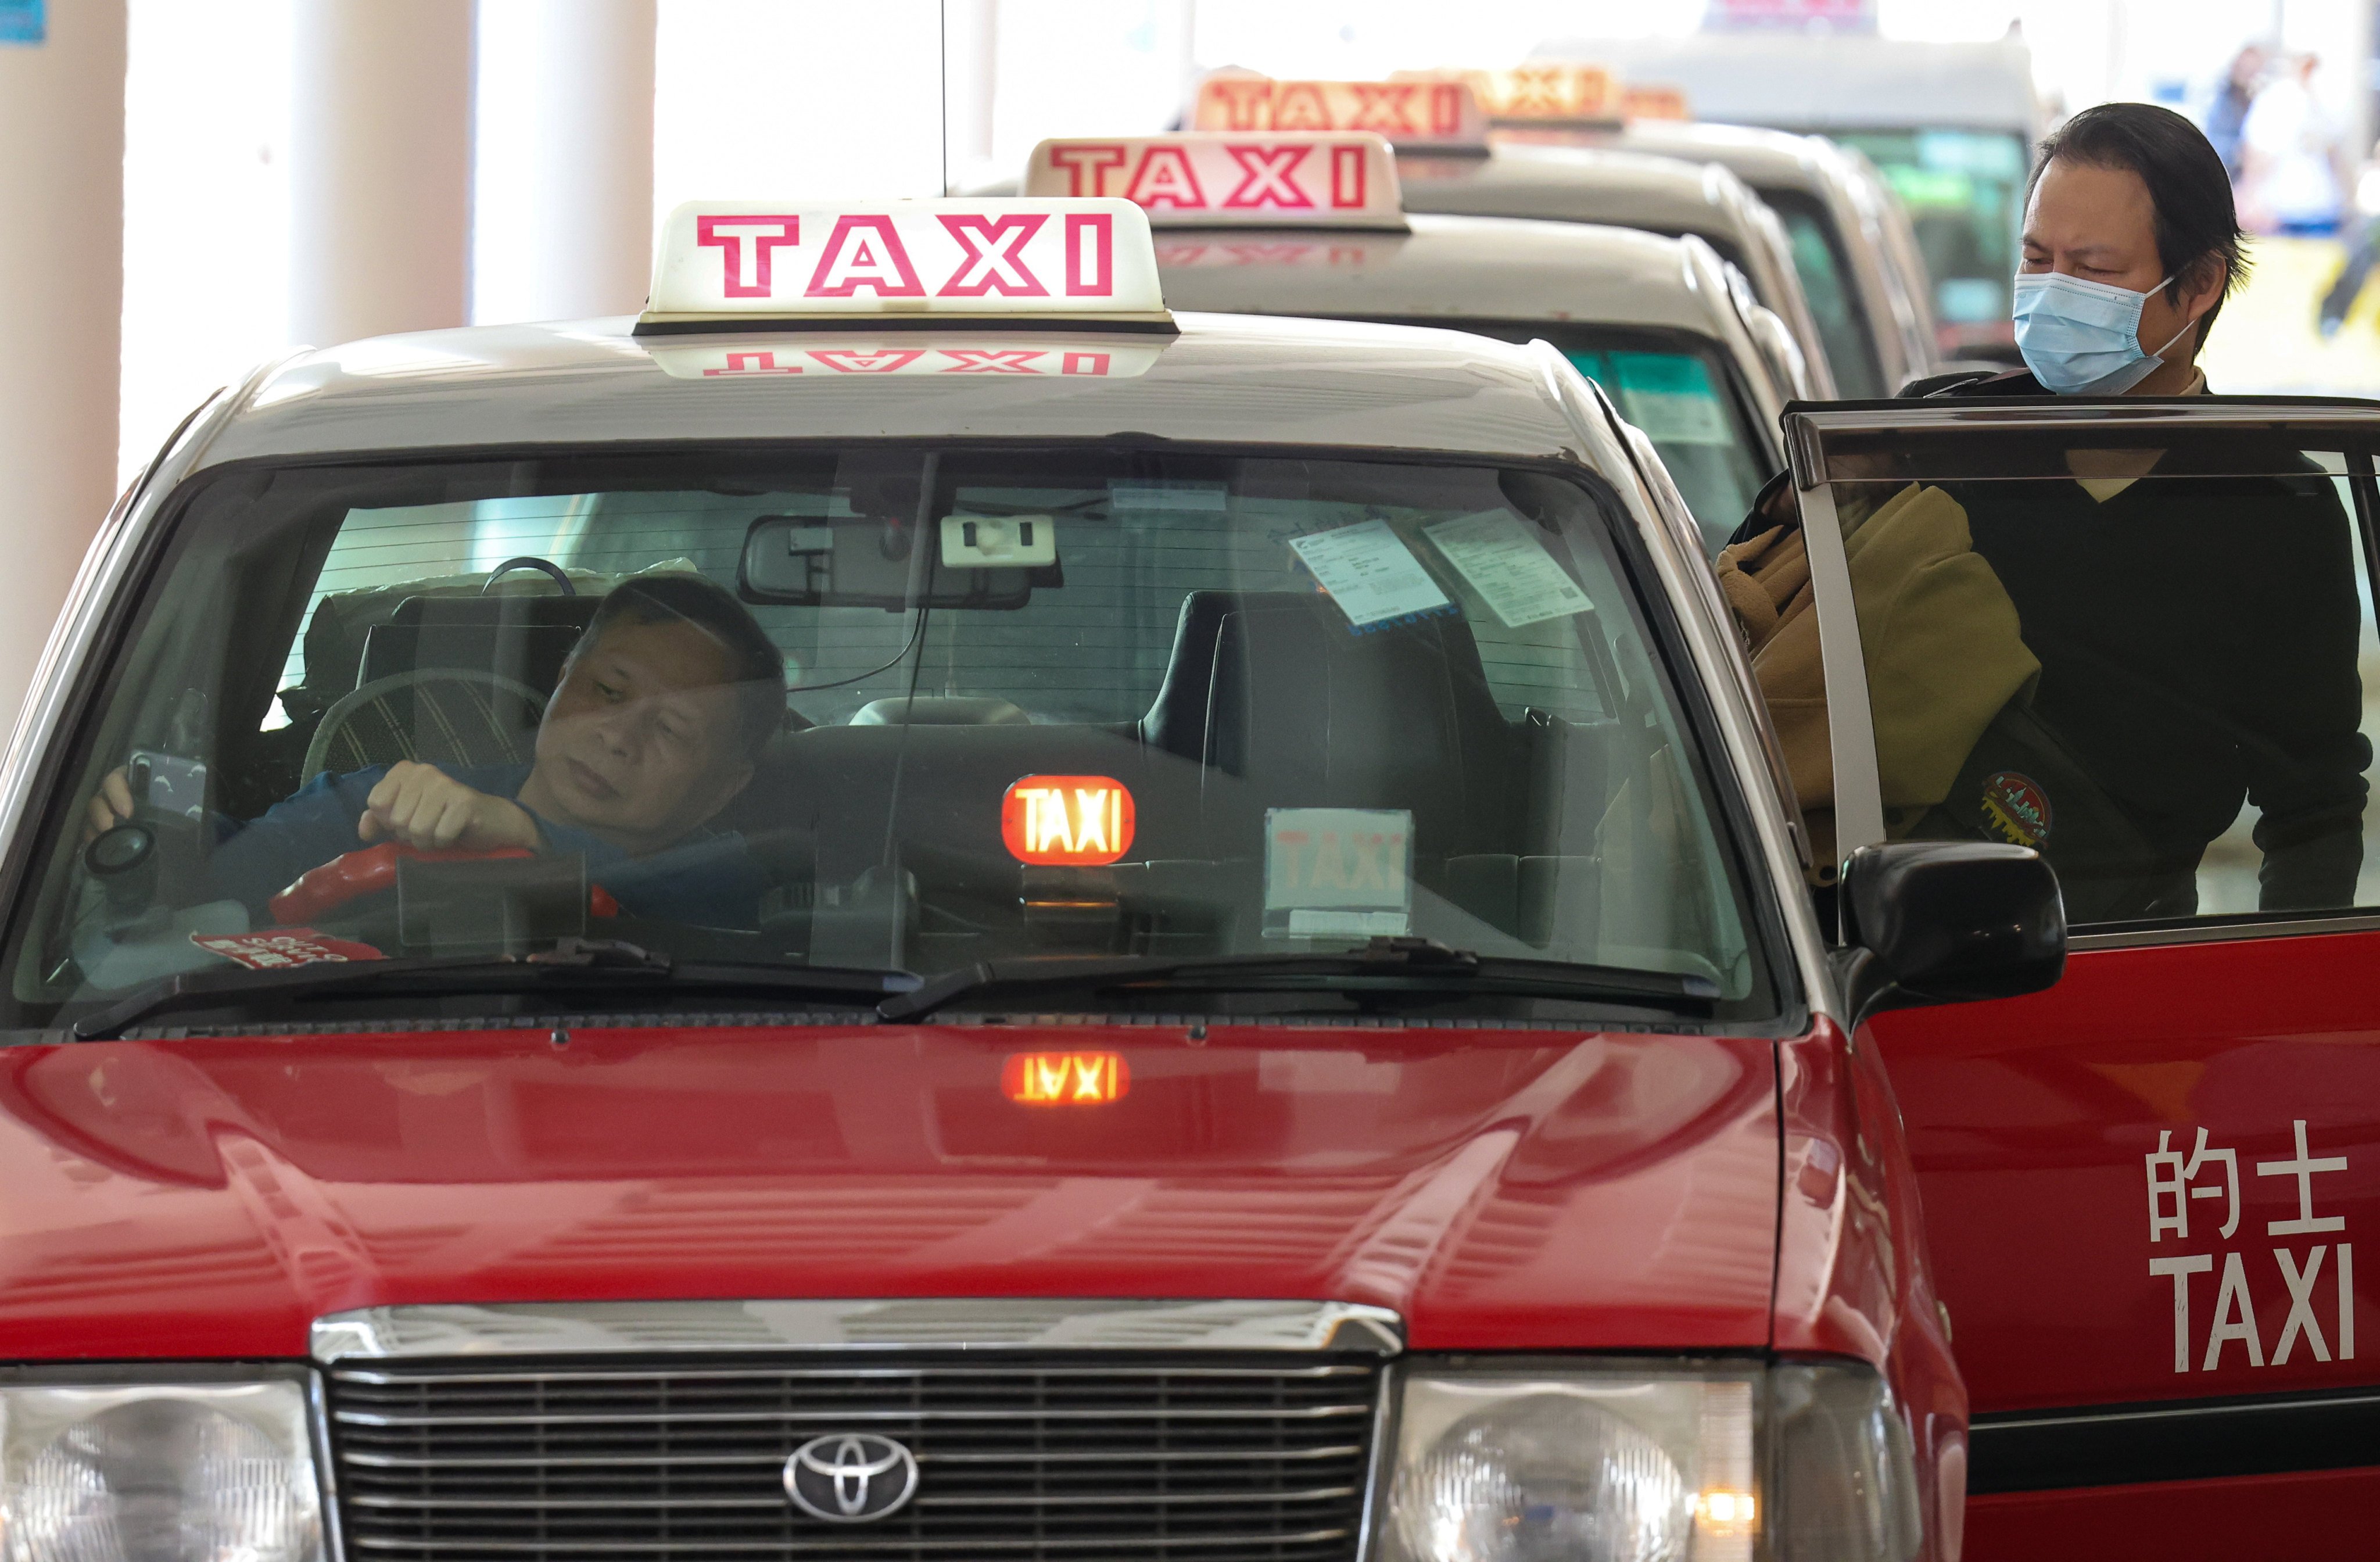 Hong Kong taxis have long relied on cash transactions. Photo: SCMP